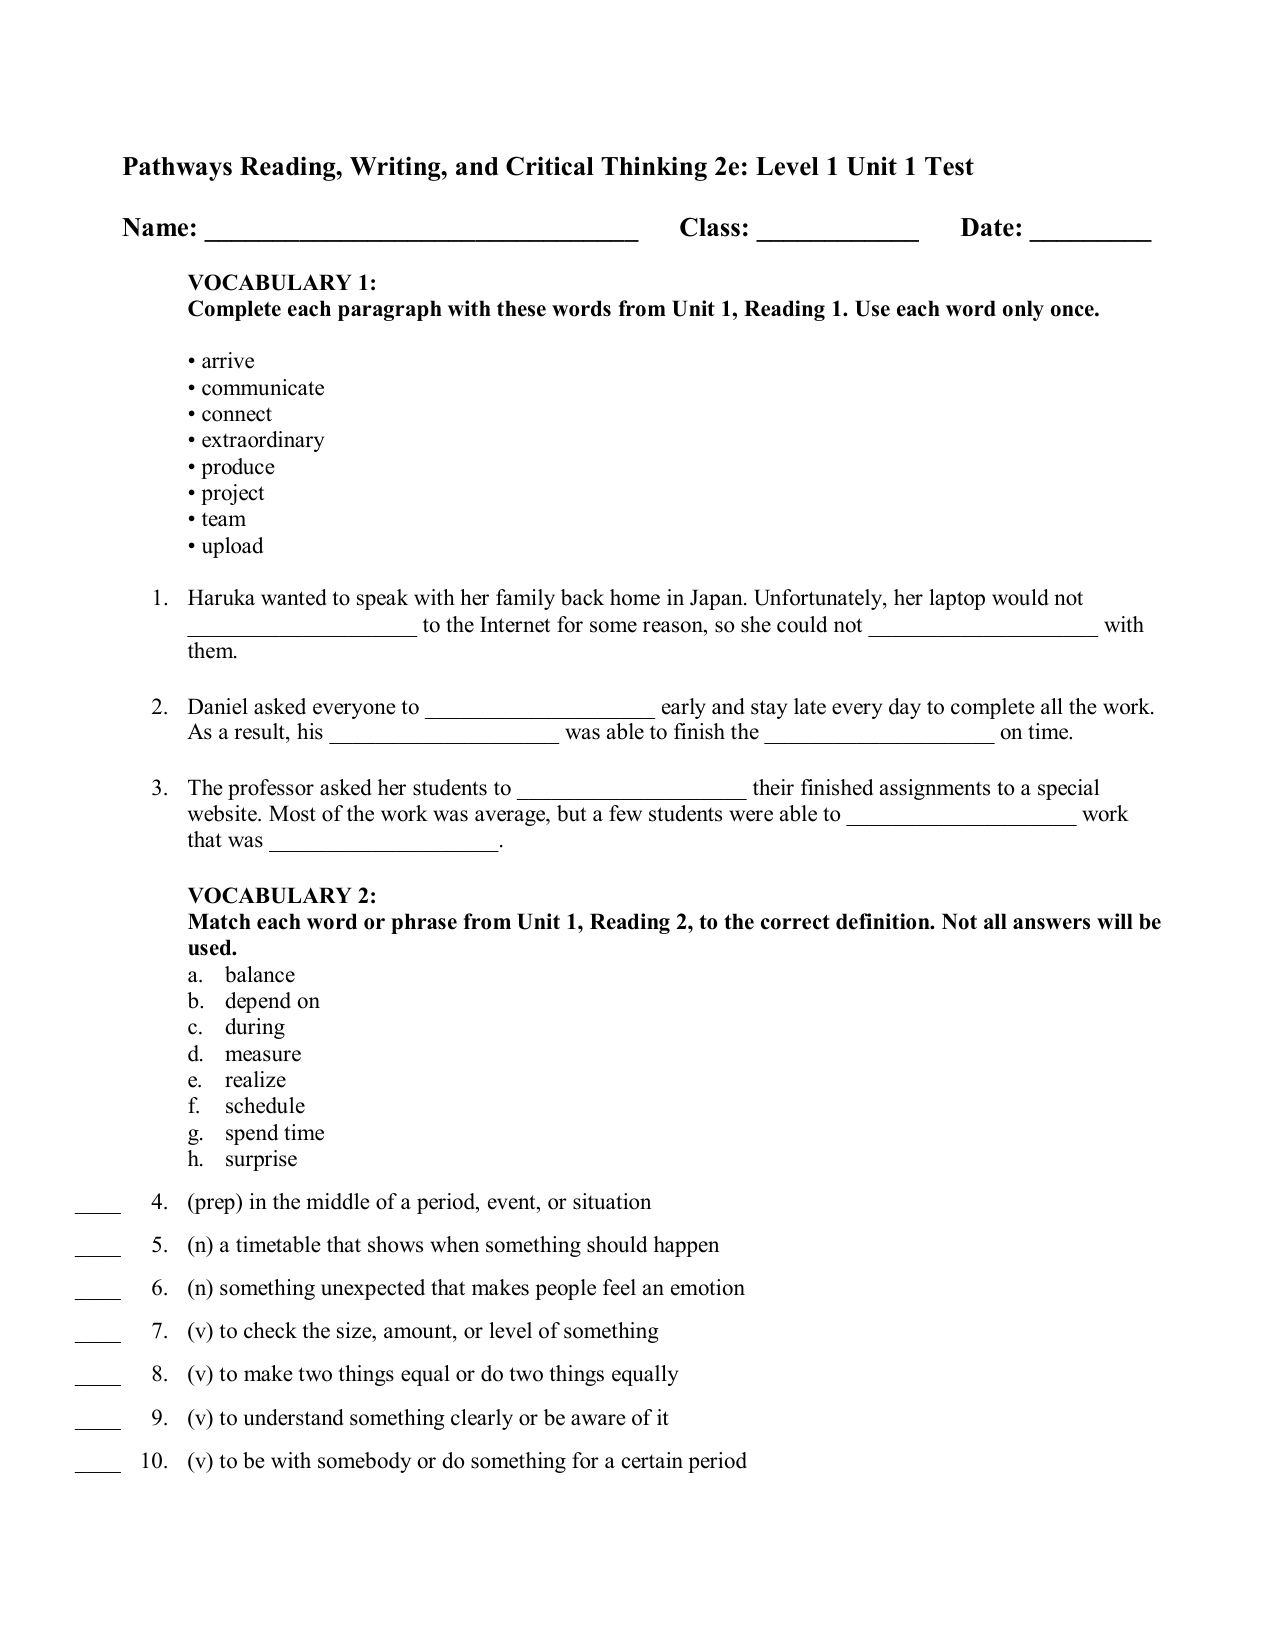 ls 2 scientific literacy and critical thinking answer key